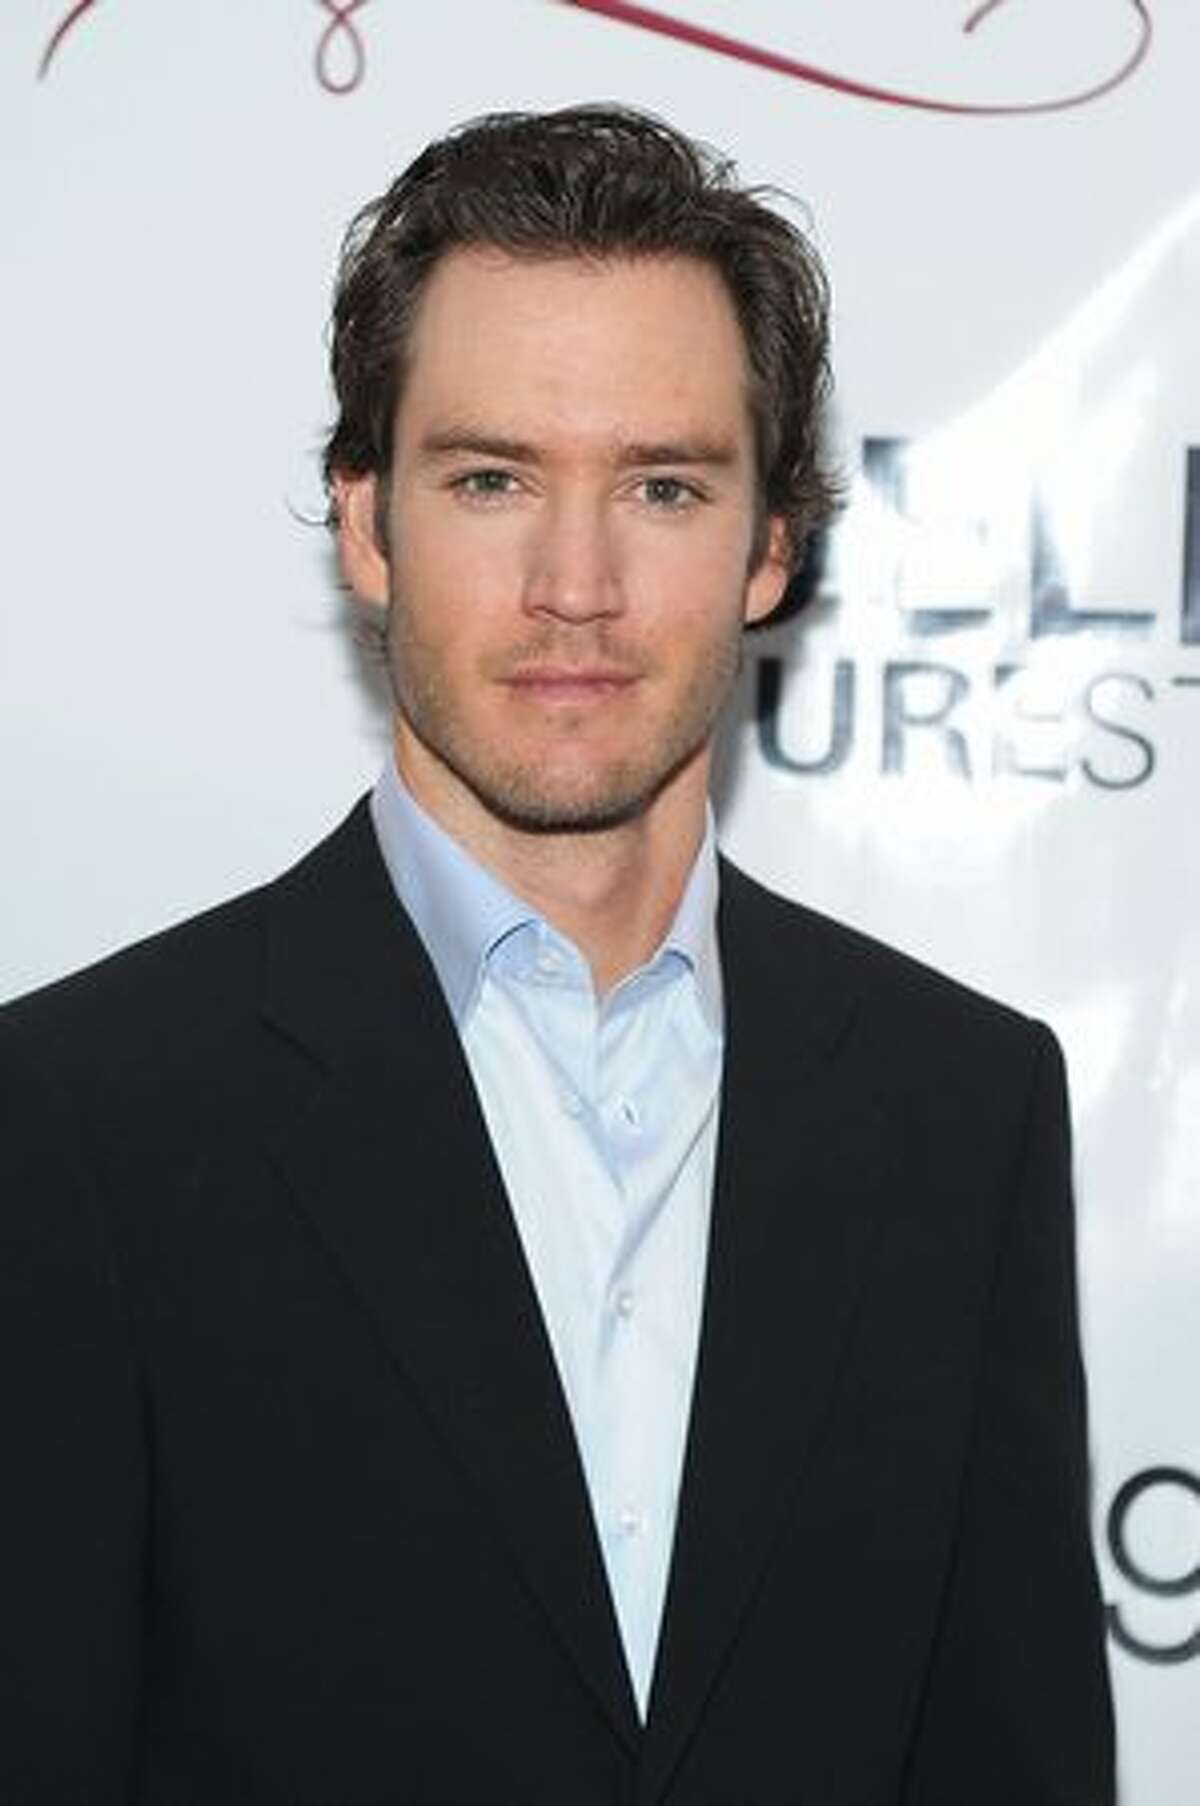 Actor Mark-Paul Gosselaar attends the 76th Annual Drama League Awards ceremony and luncheon at the Marriot Marquis on May 21, 2010 in New York City.